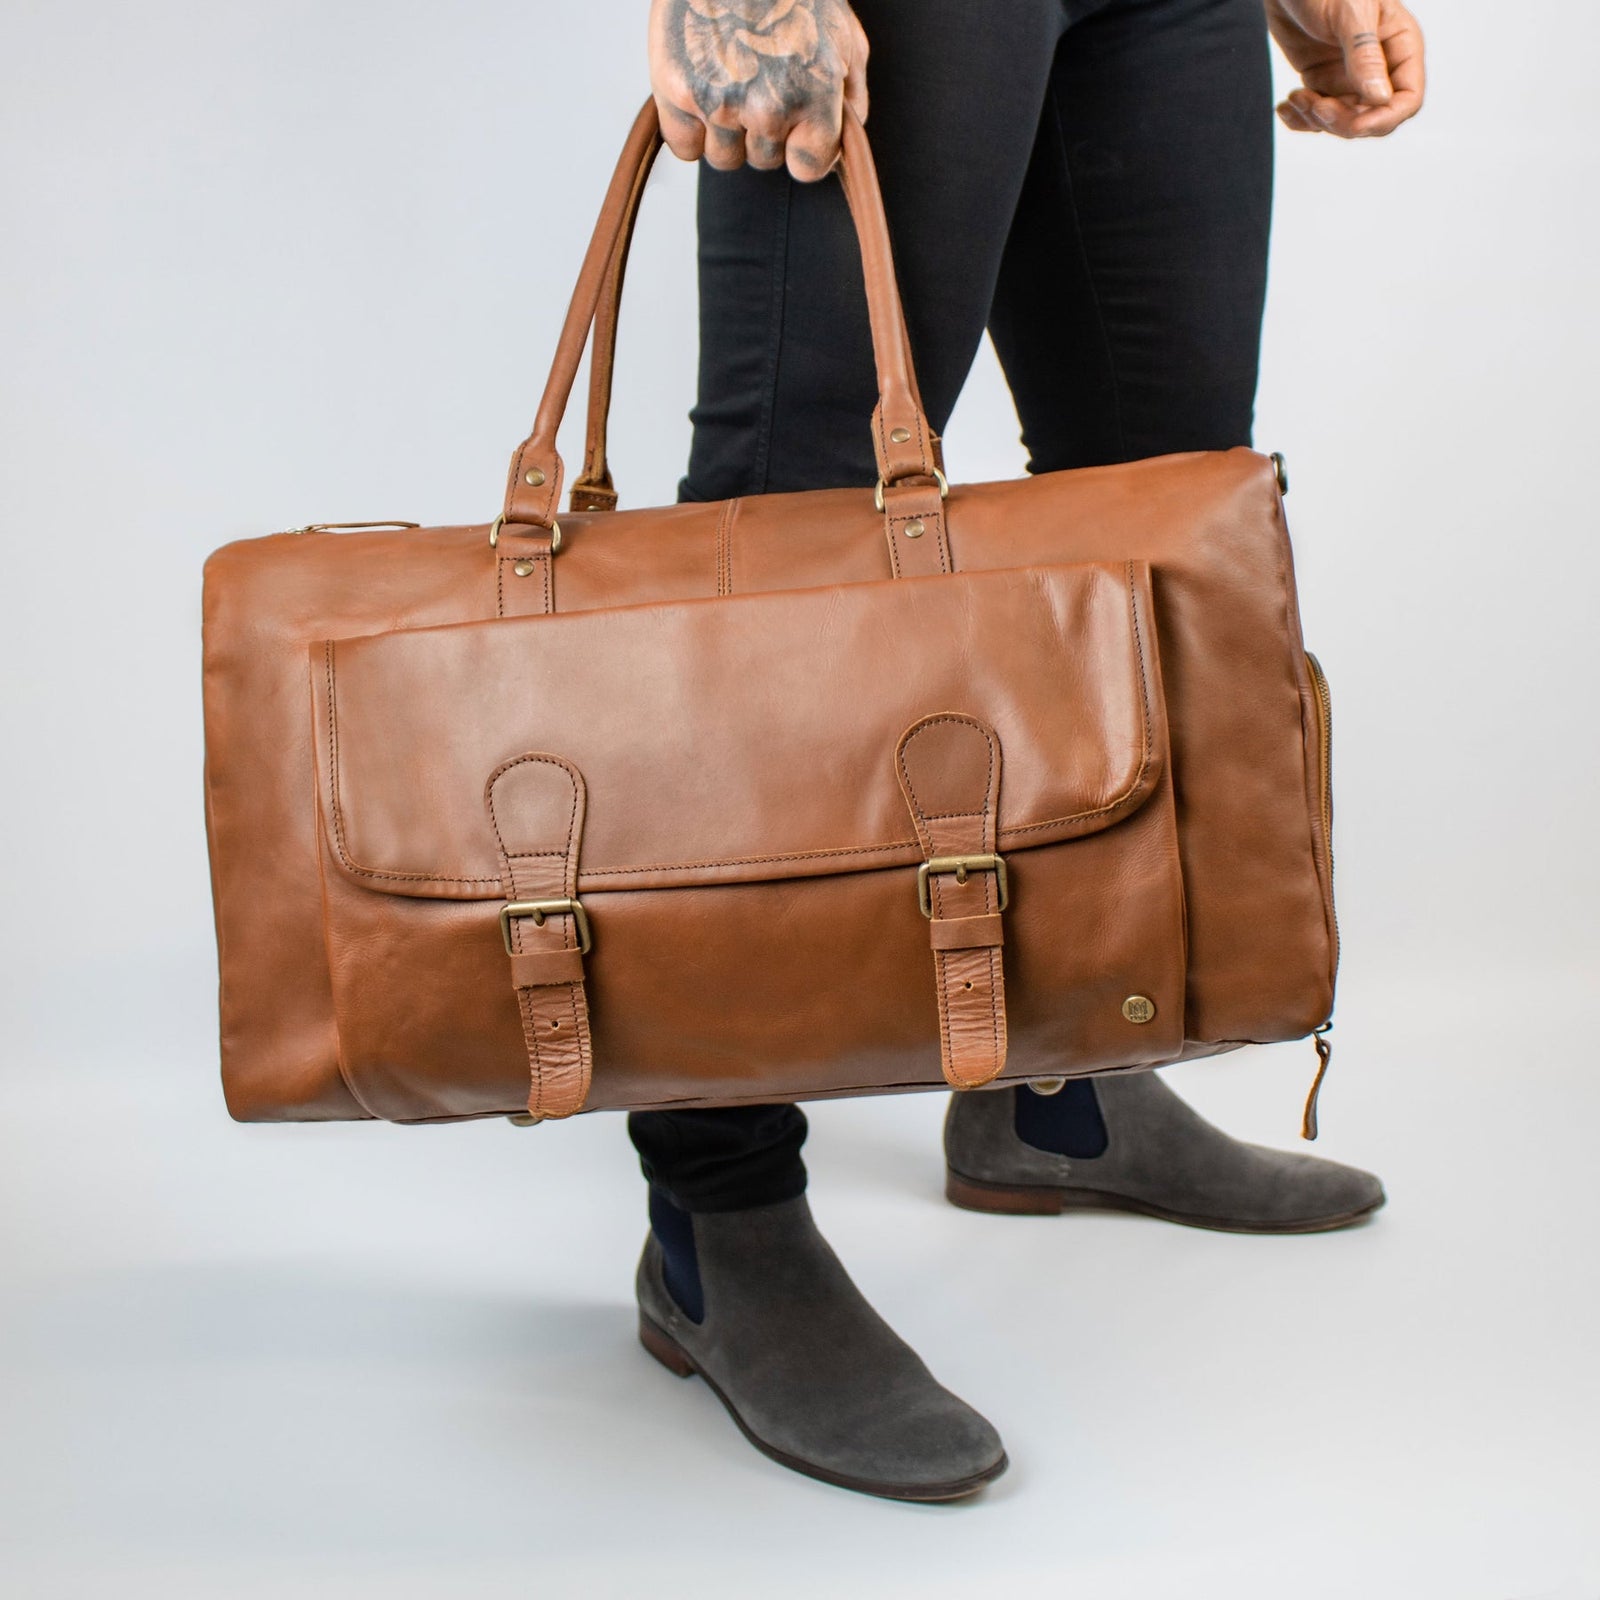 Handmade Leather Duffle Bag | Full Grain Leather | TSA Approved Cabin Sized  Duffel | Vintage Classic Style with Modern Outlook | Carry On Gifts for